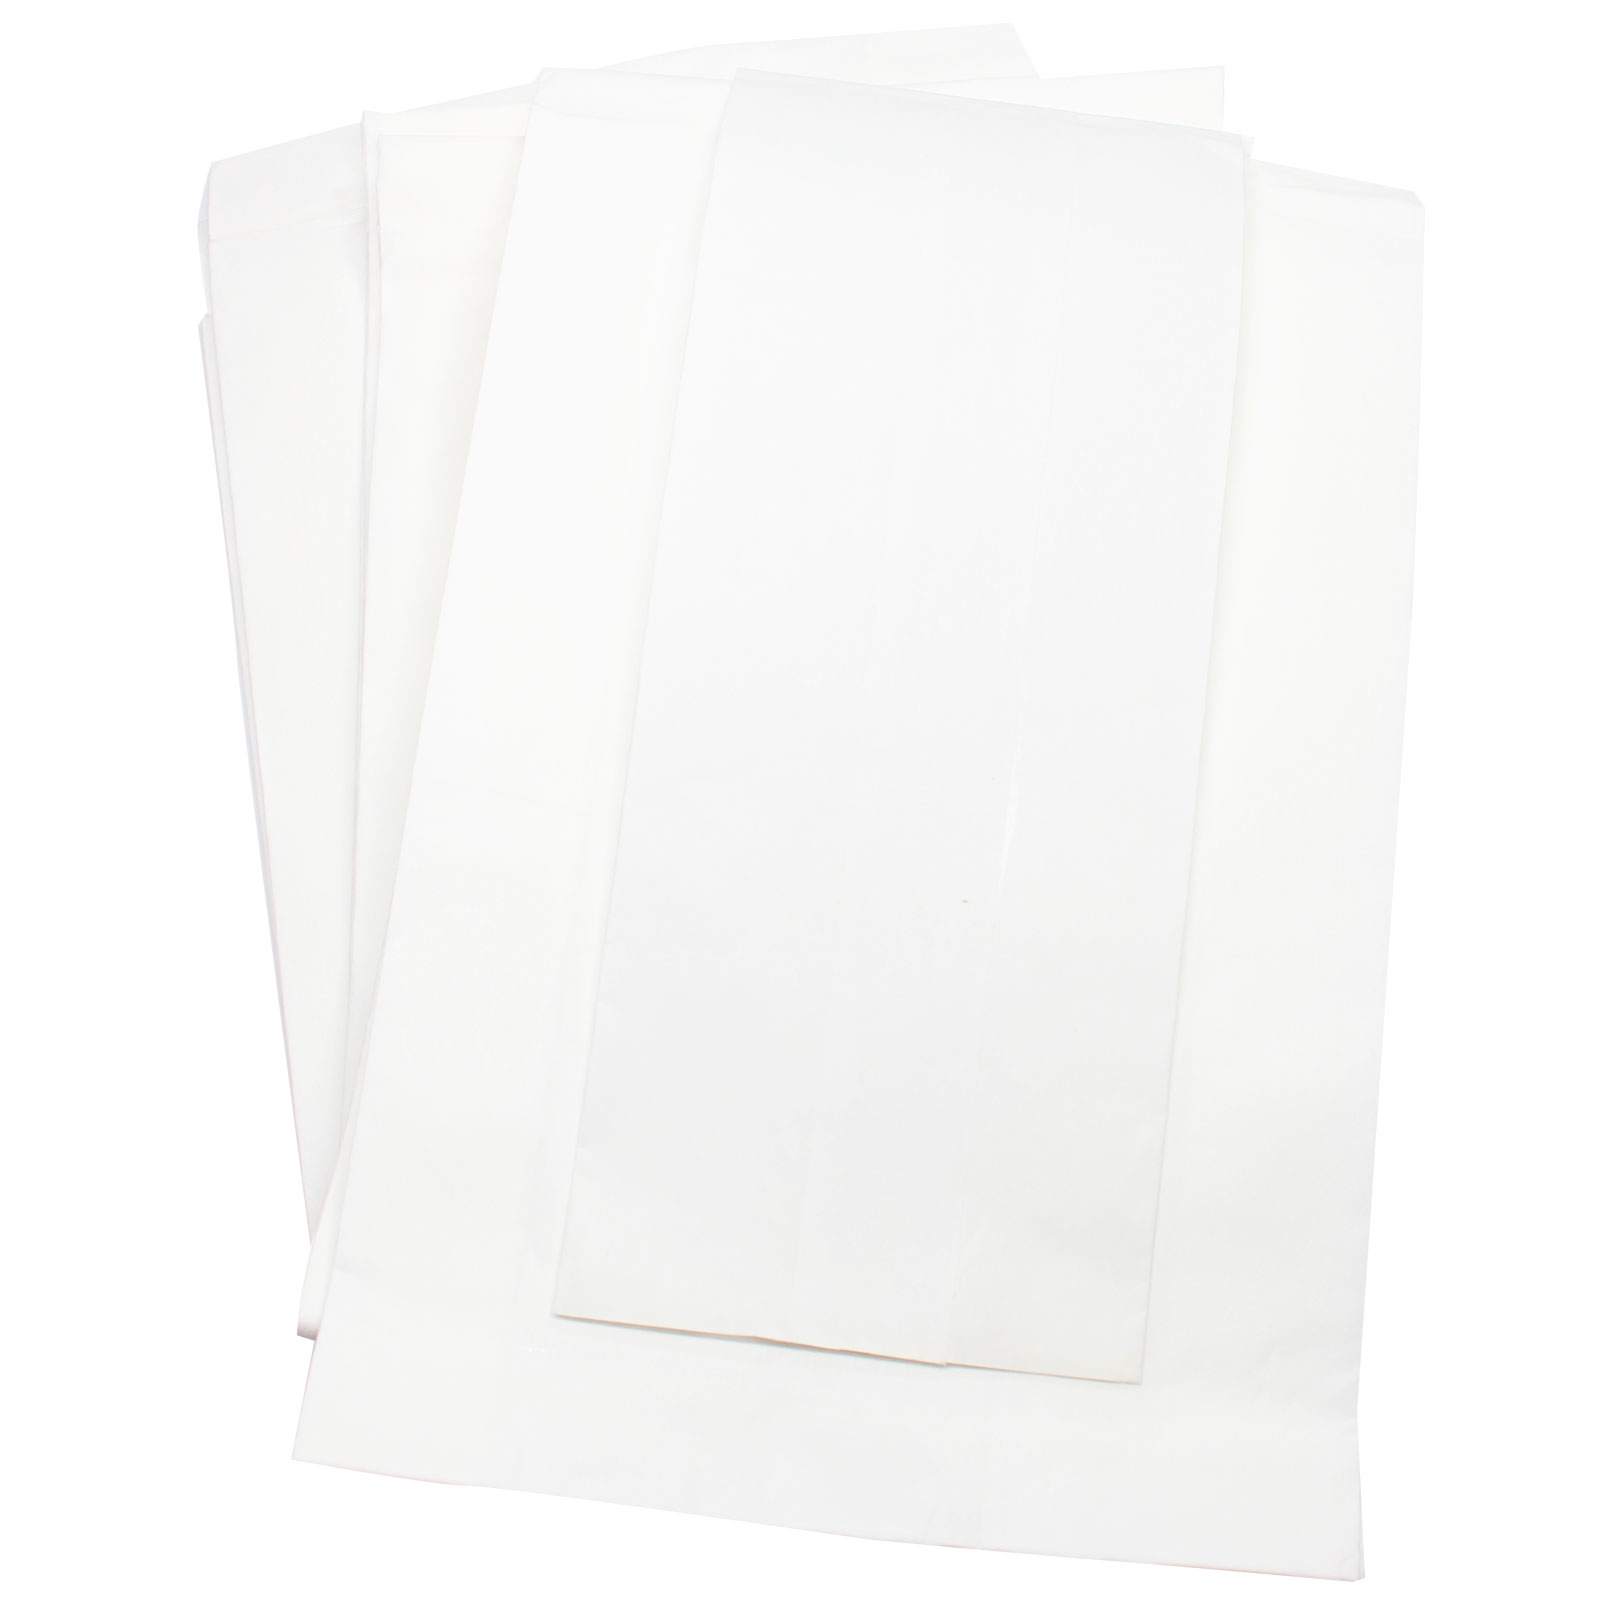 24 Replacement for Singer SST020 Vacuum Bags - Compatible with Singer SUB-1 Vacuum Bags (8-Pack - 3 Vacuum Bags per Pack) - image 3 of 4